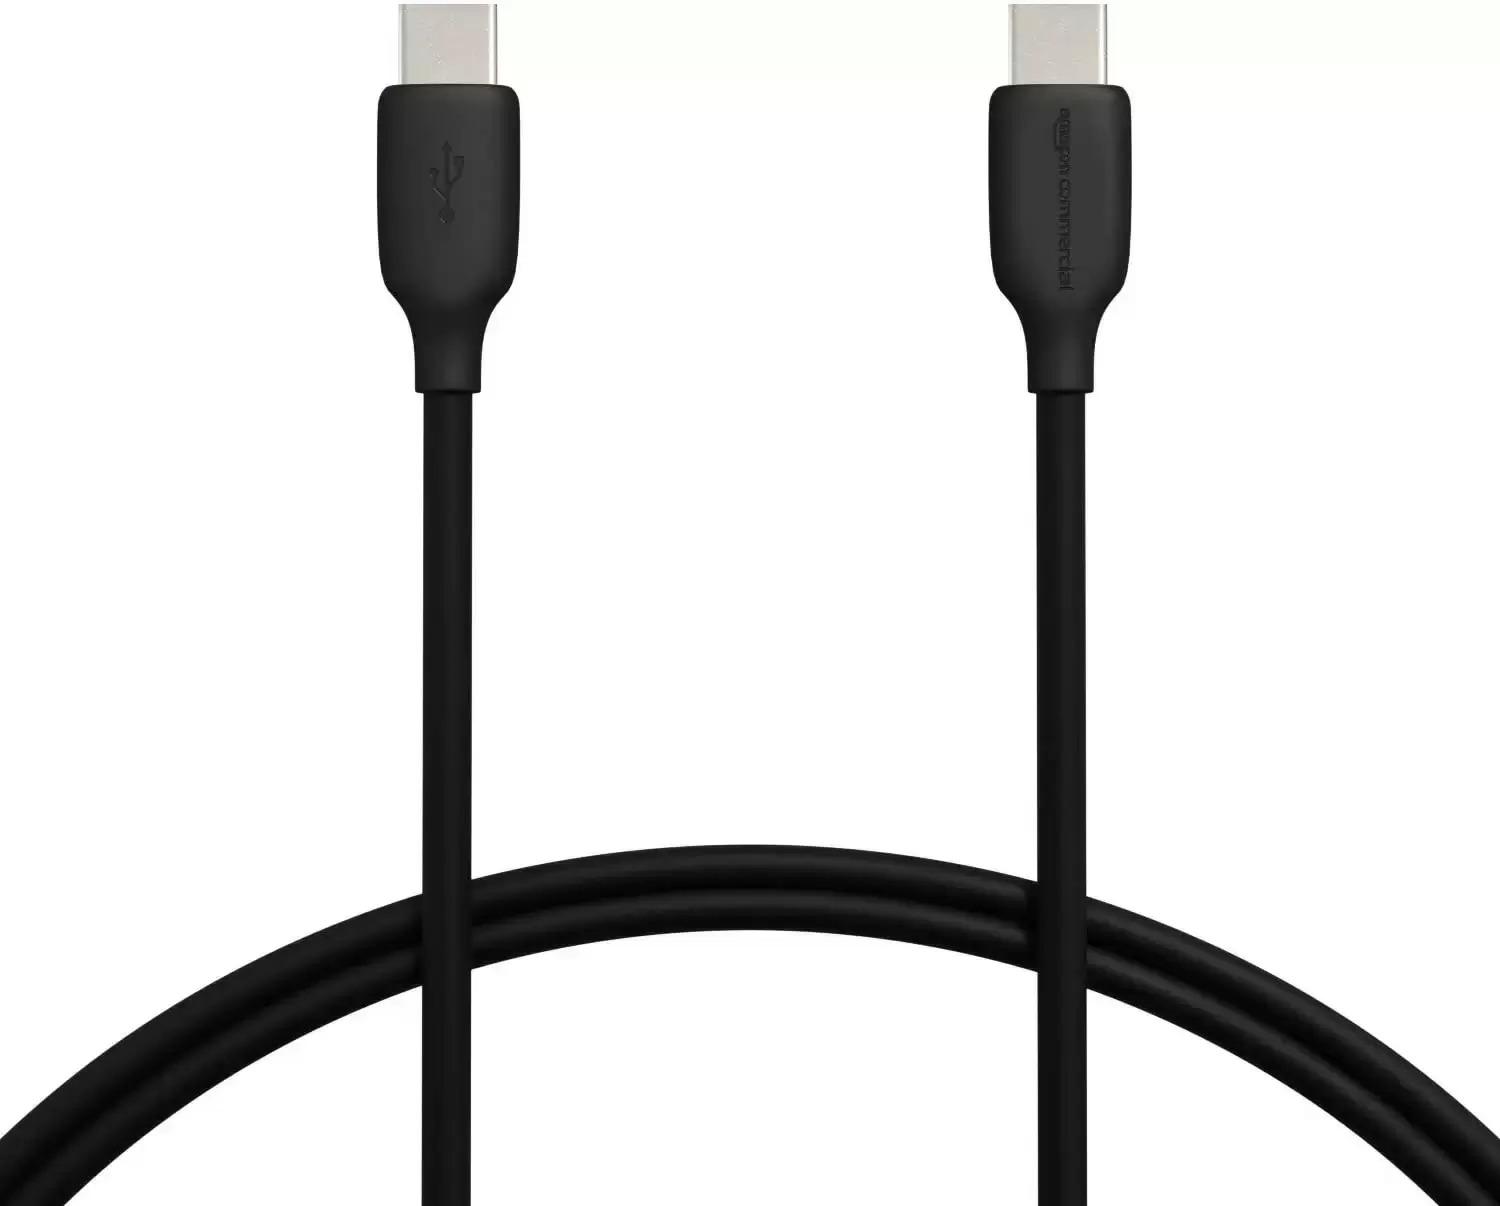 2 Amazon Basics 60W Fast Charging USB-C Cables for $5.99